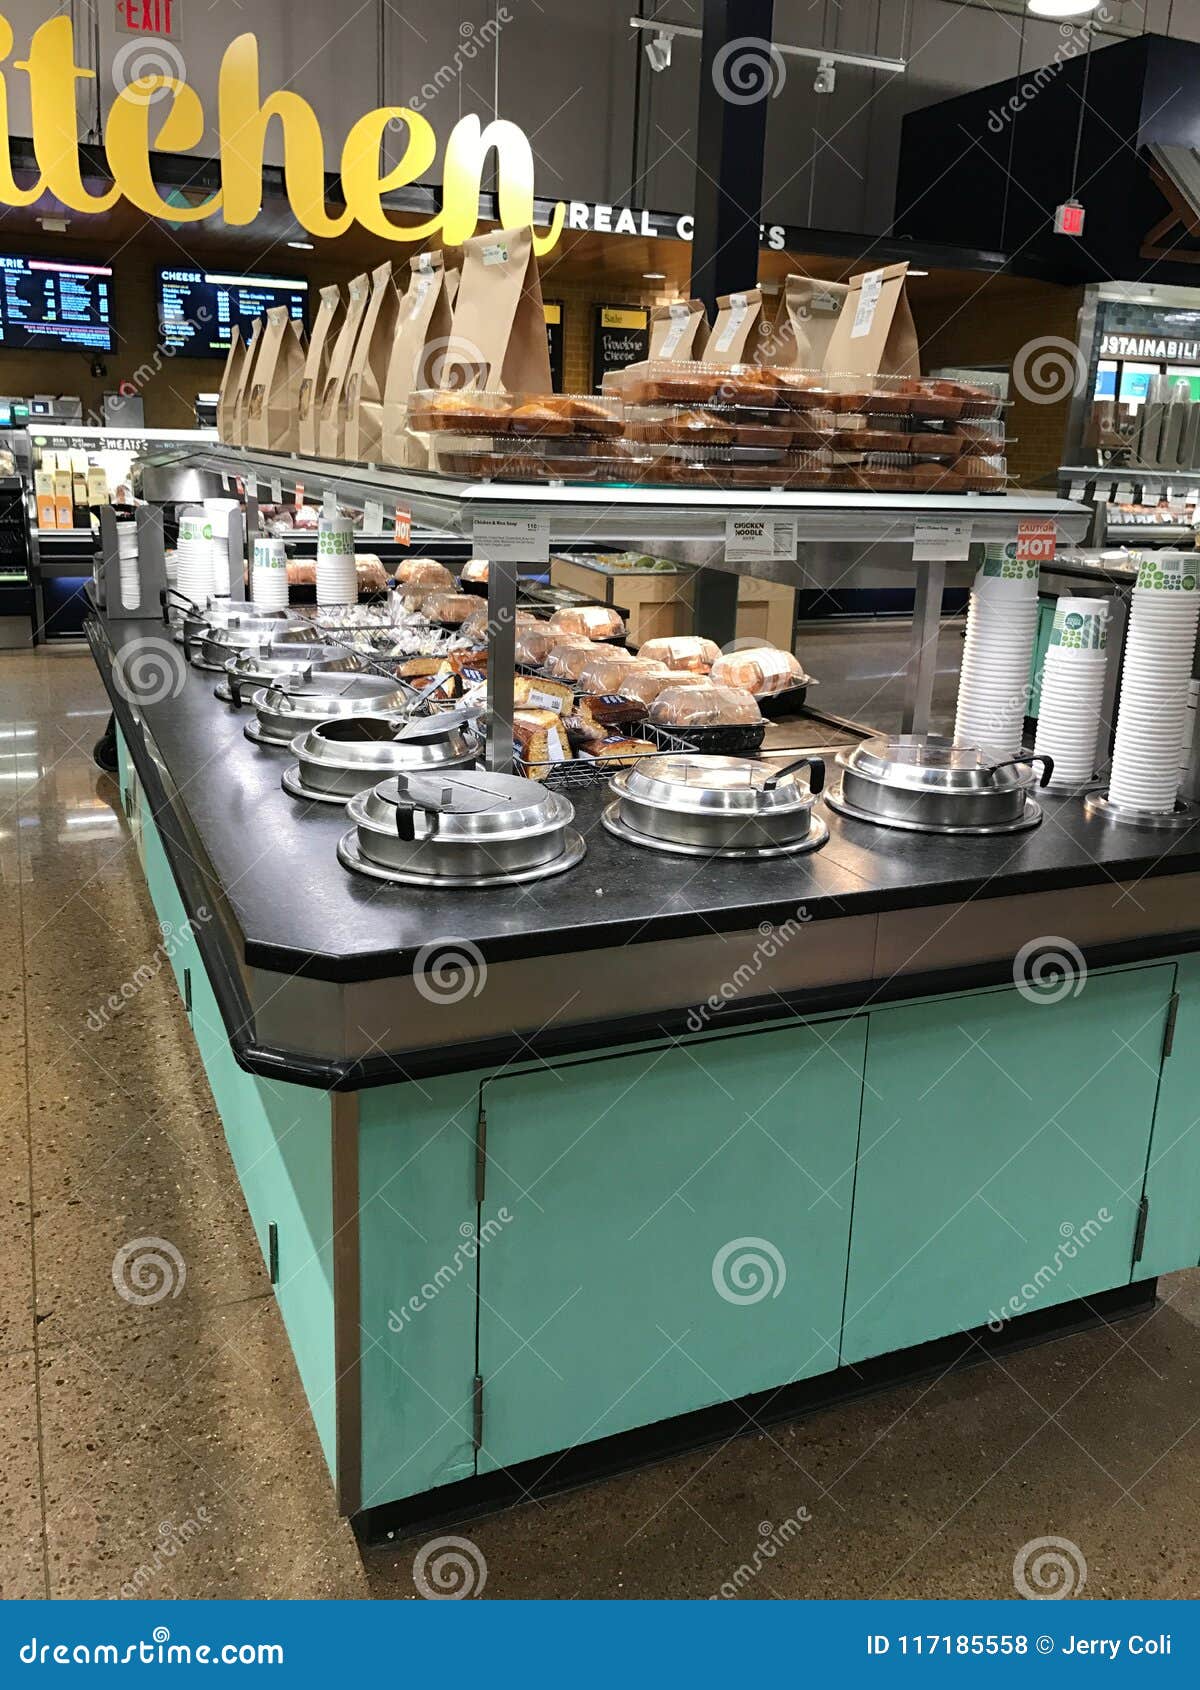 Whole Foods Kitchen at Legacy Place, Dedham, MA Editorial Stock